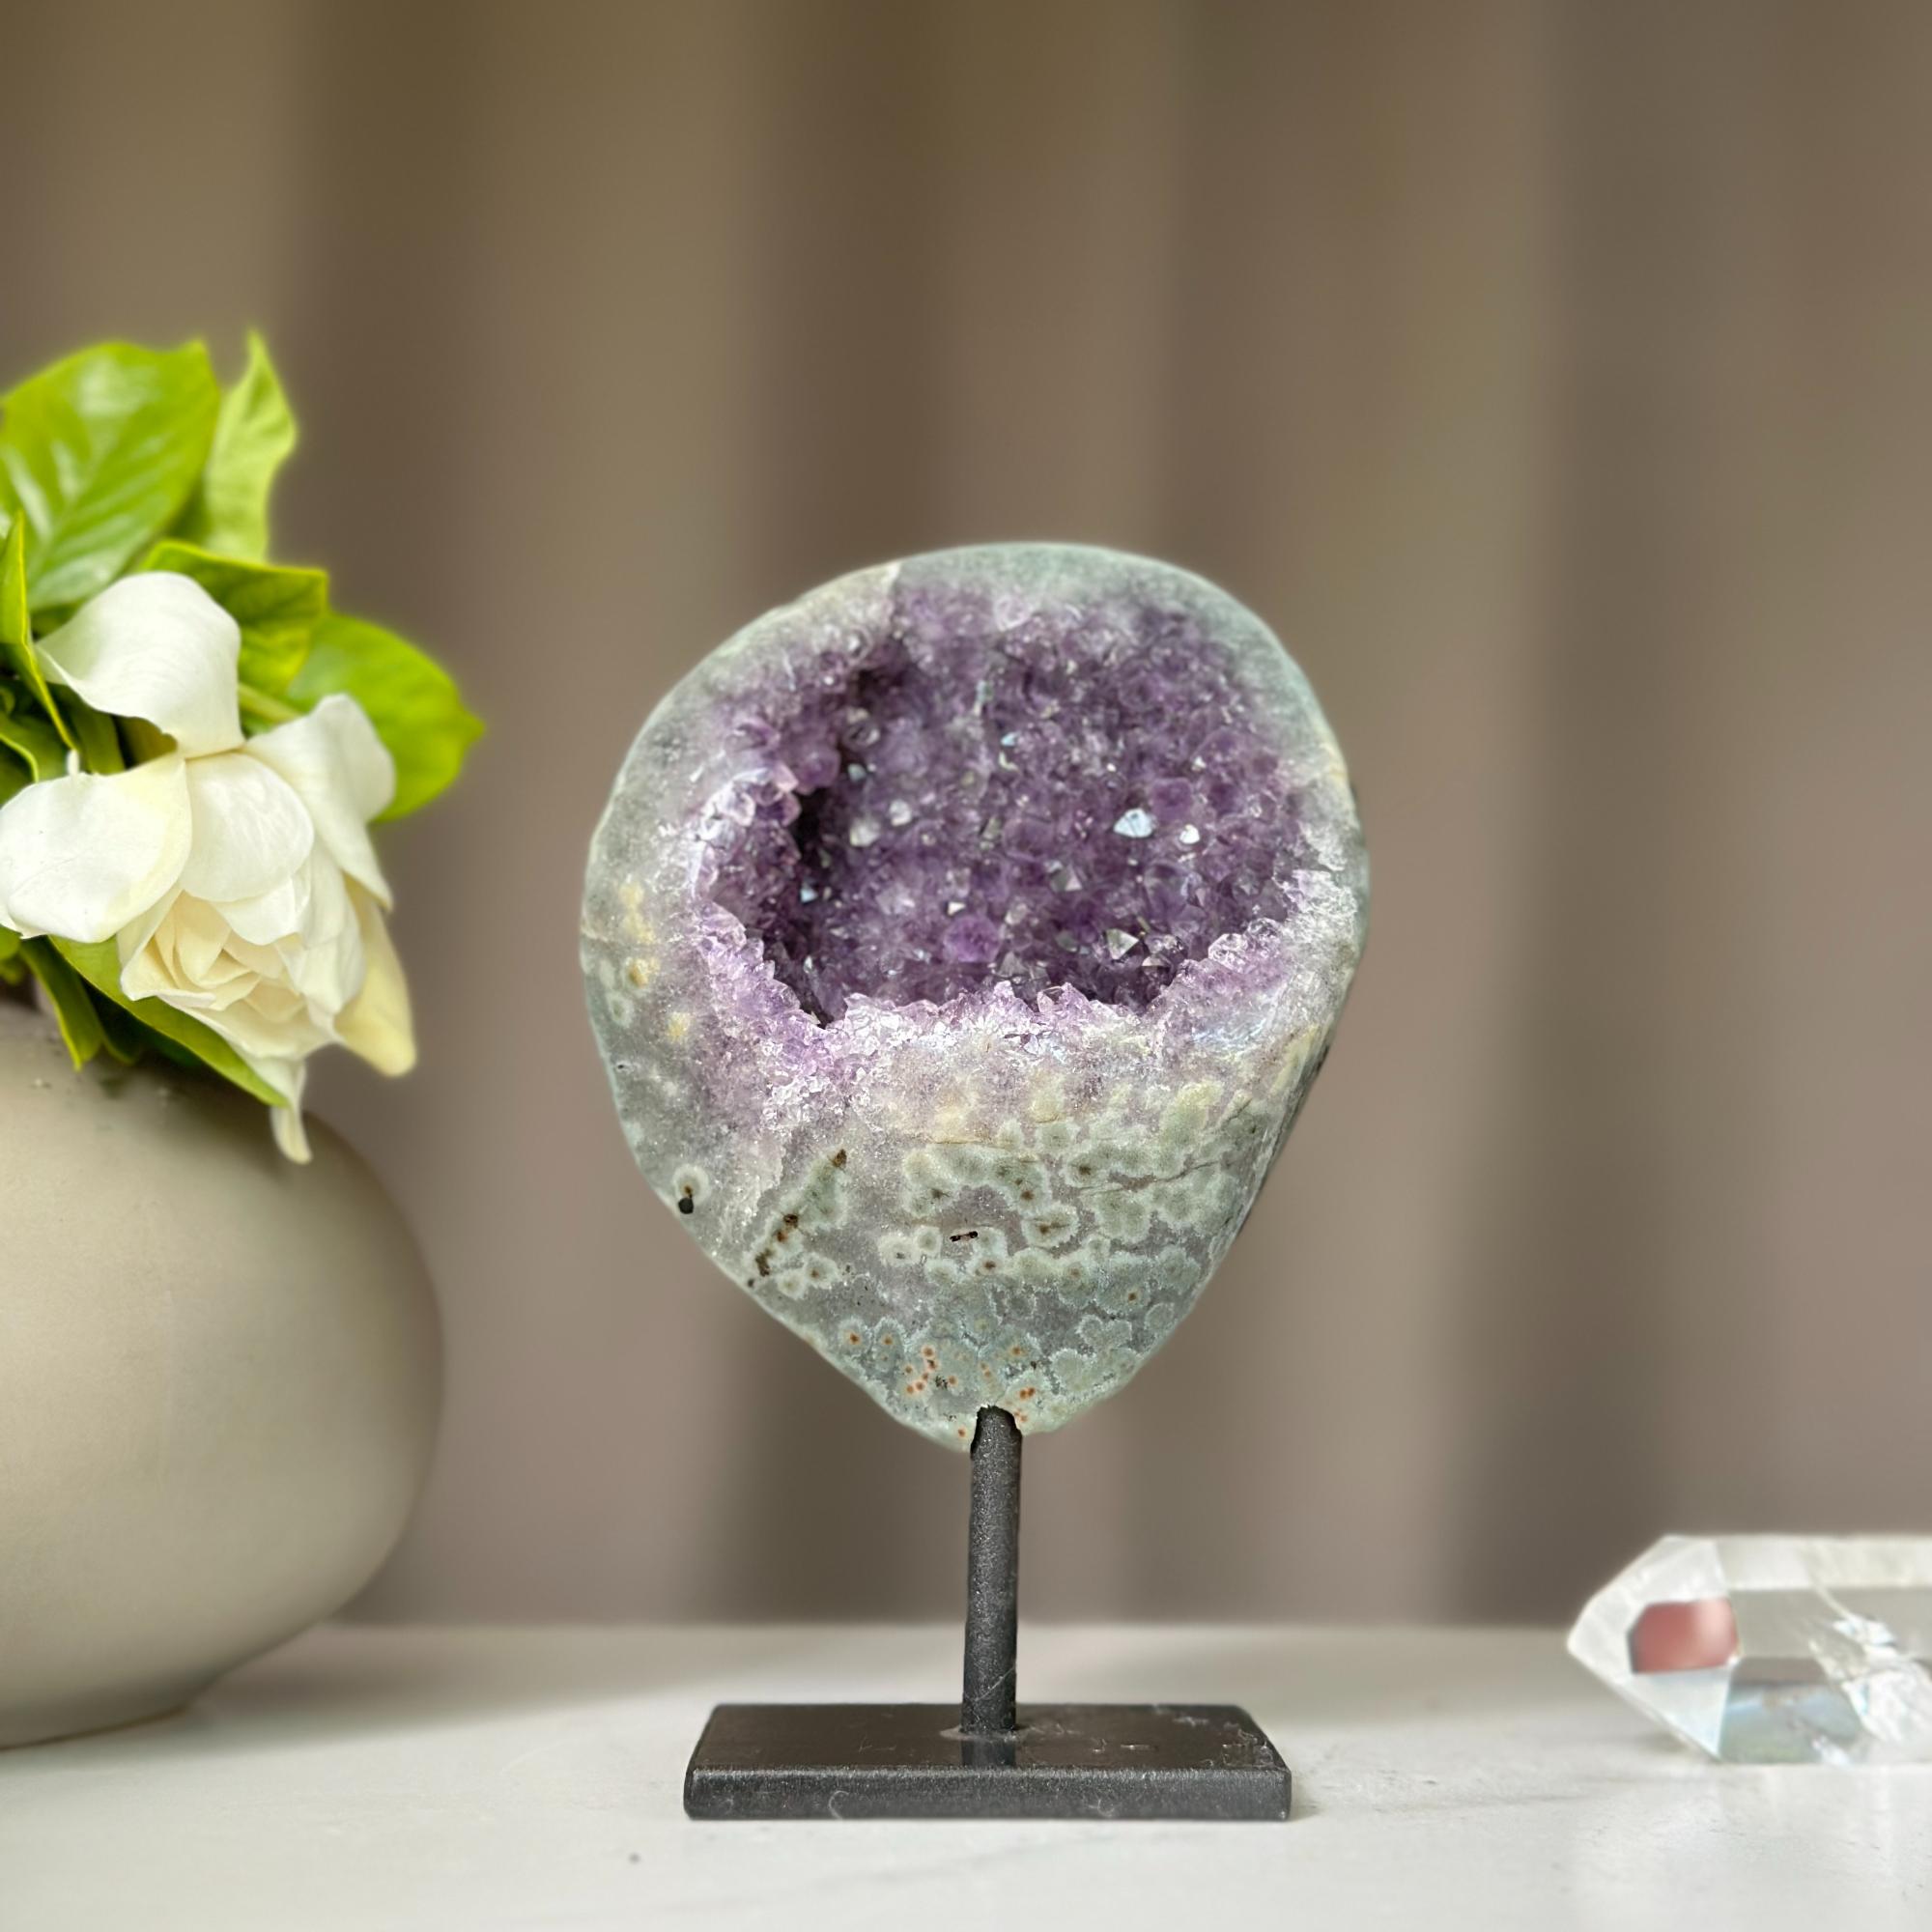 Rare Amethyst and Gray Agate Crystal Decor Piece, Galaxy Amethyst with metallic base included, Stalactite crystal for home decoration